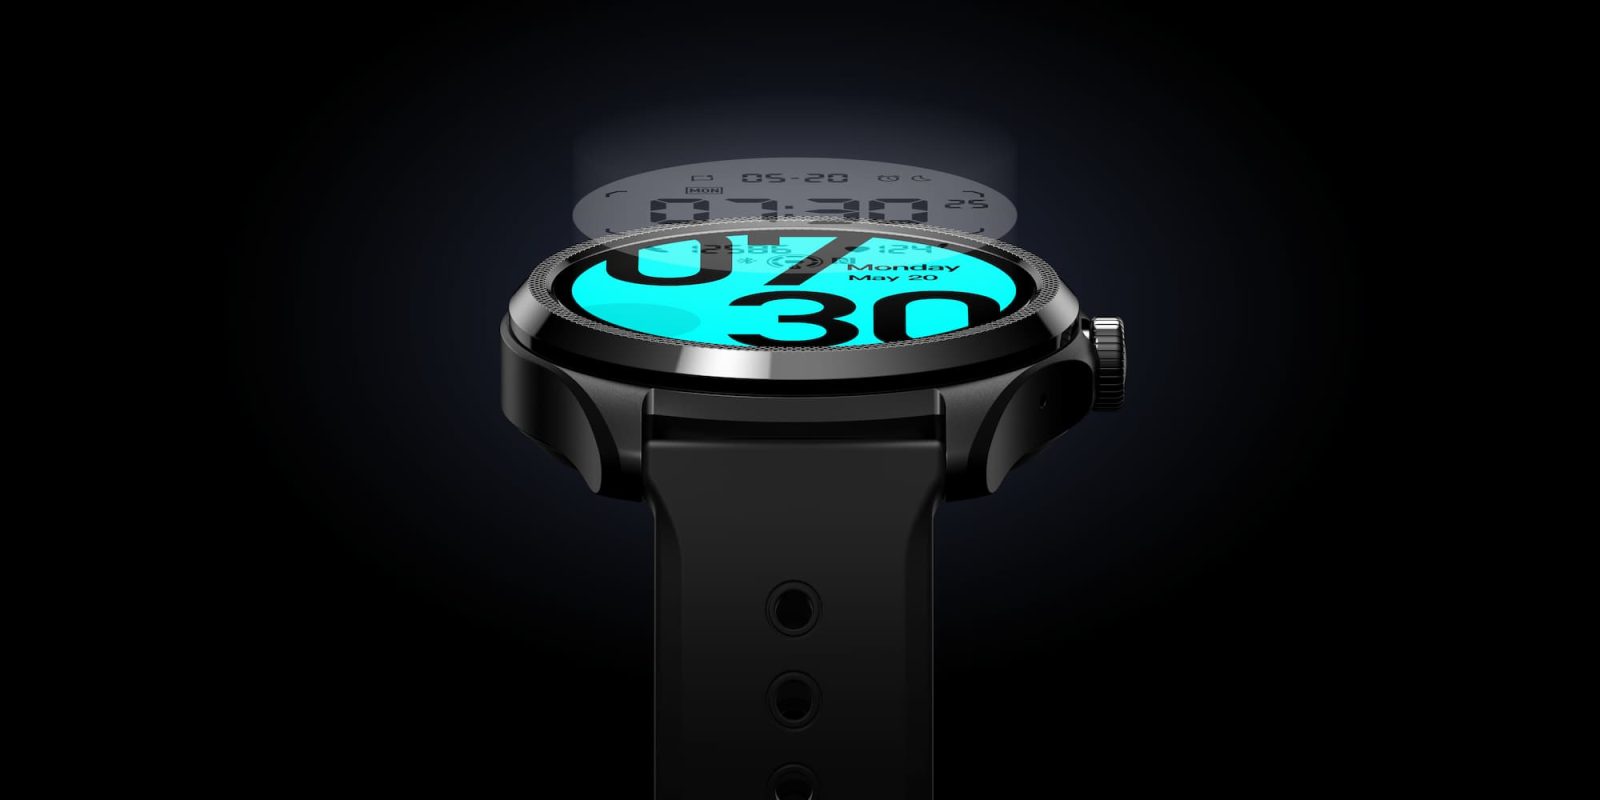 mobvoi Ticwatch Pro 5 Android Smartwatch User Guide